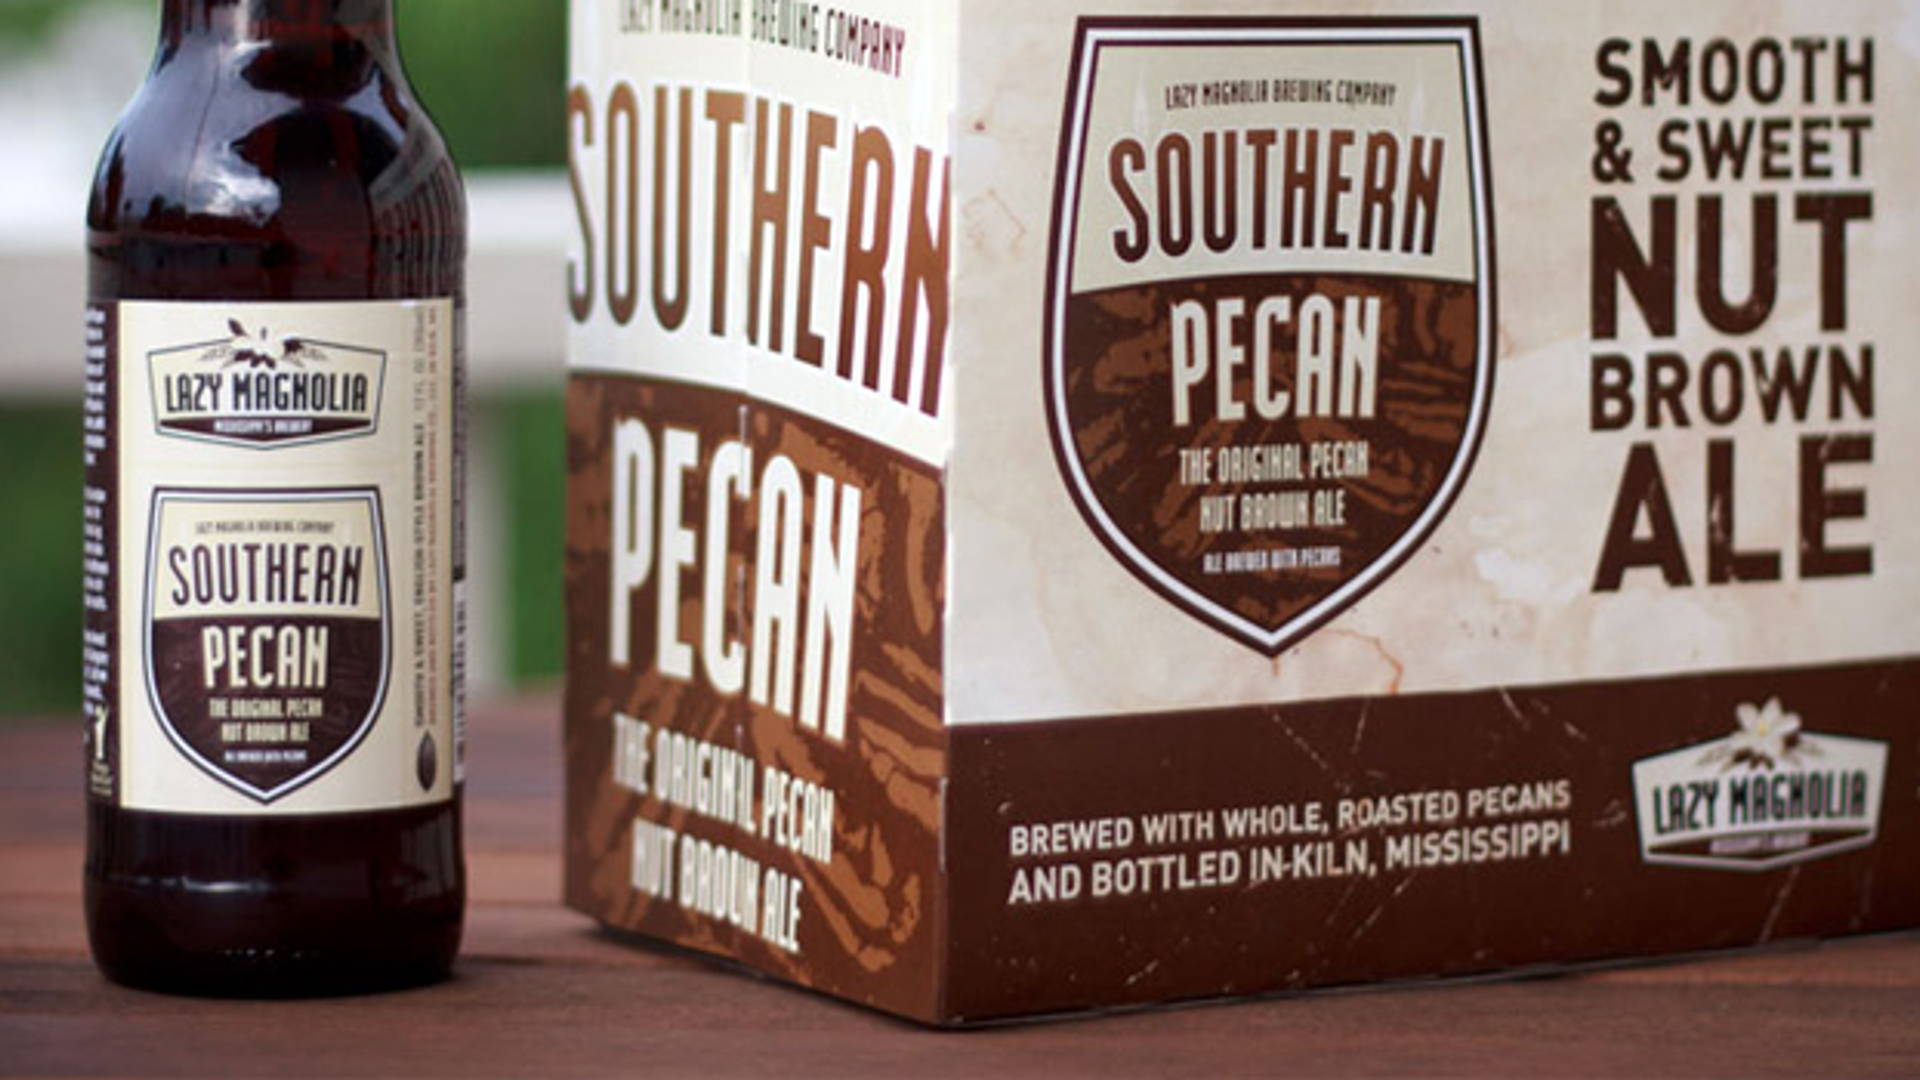 Featured image for Lazy Magnolia Brewery: Southern Pecan Nut Brown Ale Six Pack 